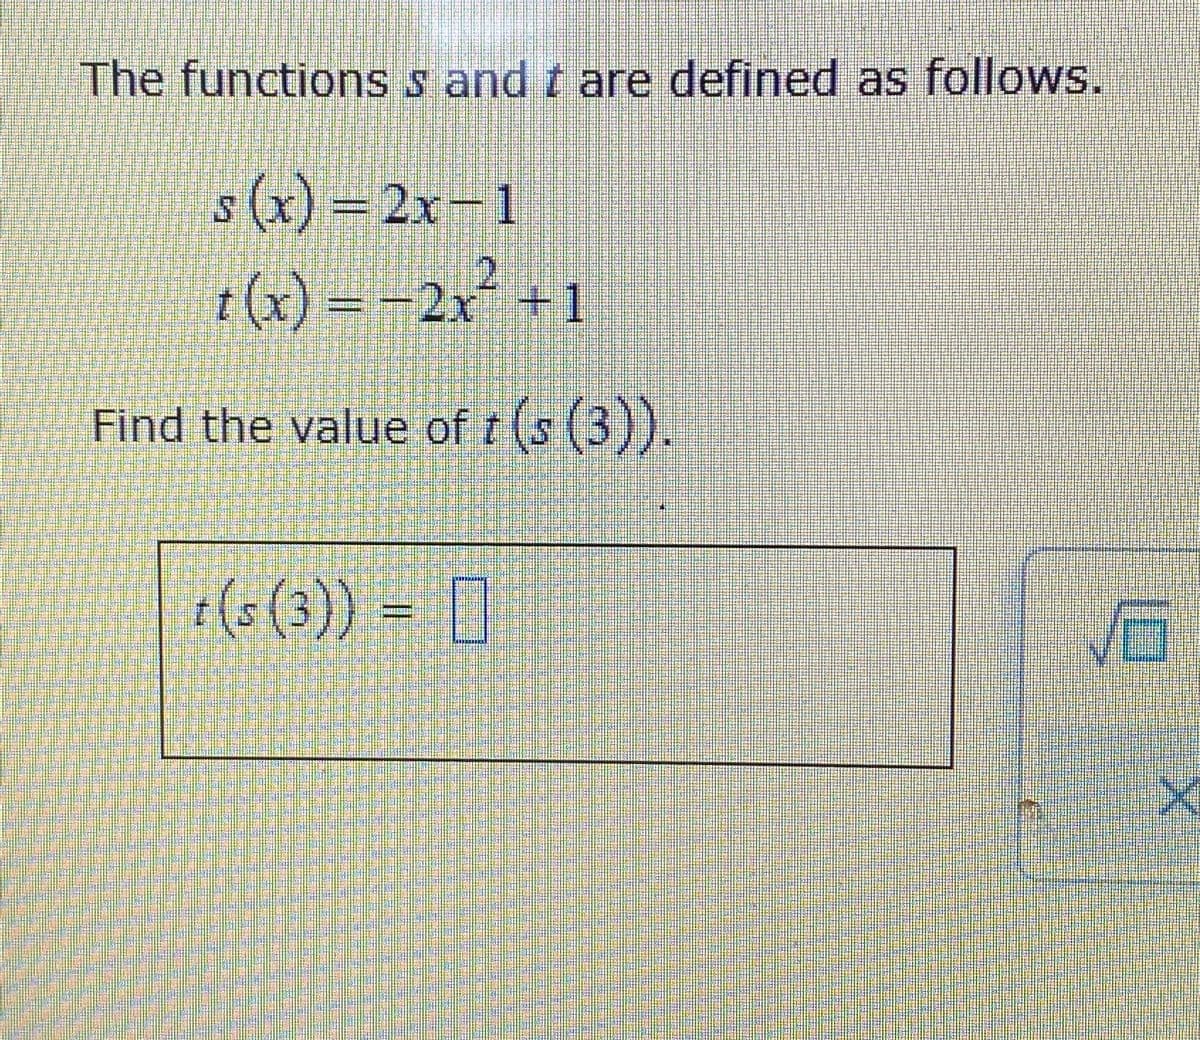 The functions s and t are defined as follows.
s(x)=2x-1
t(x) = −2x² +1
Find the value of t (s (3)).
+(s(3)) = 1
**
VG
X